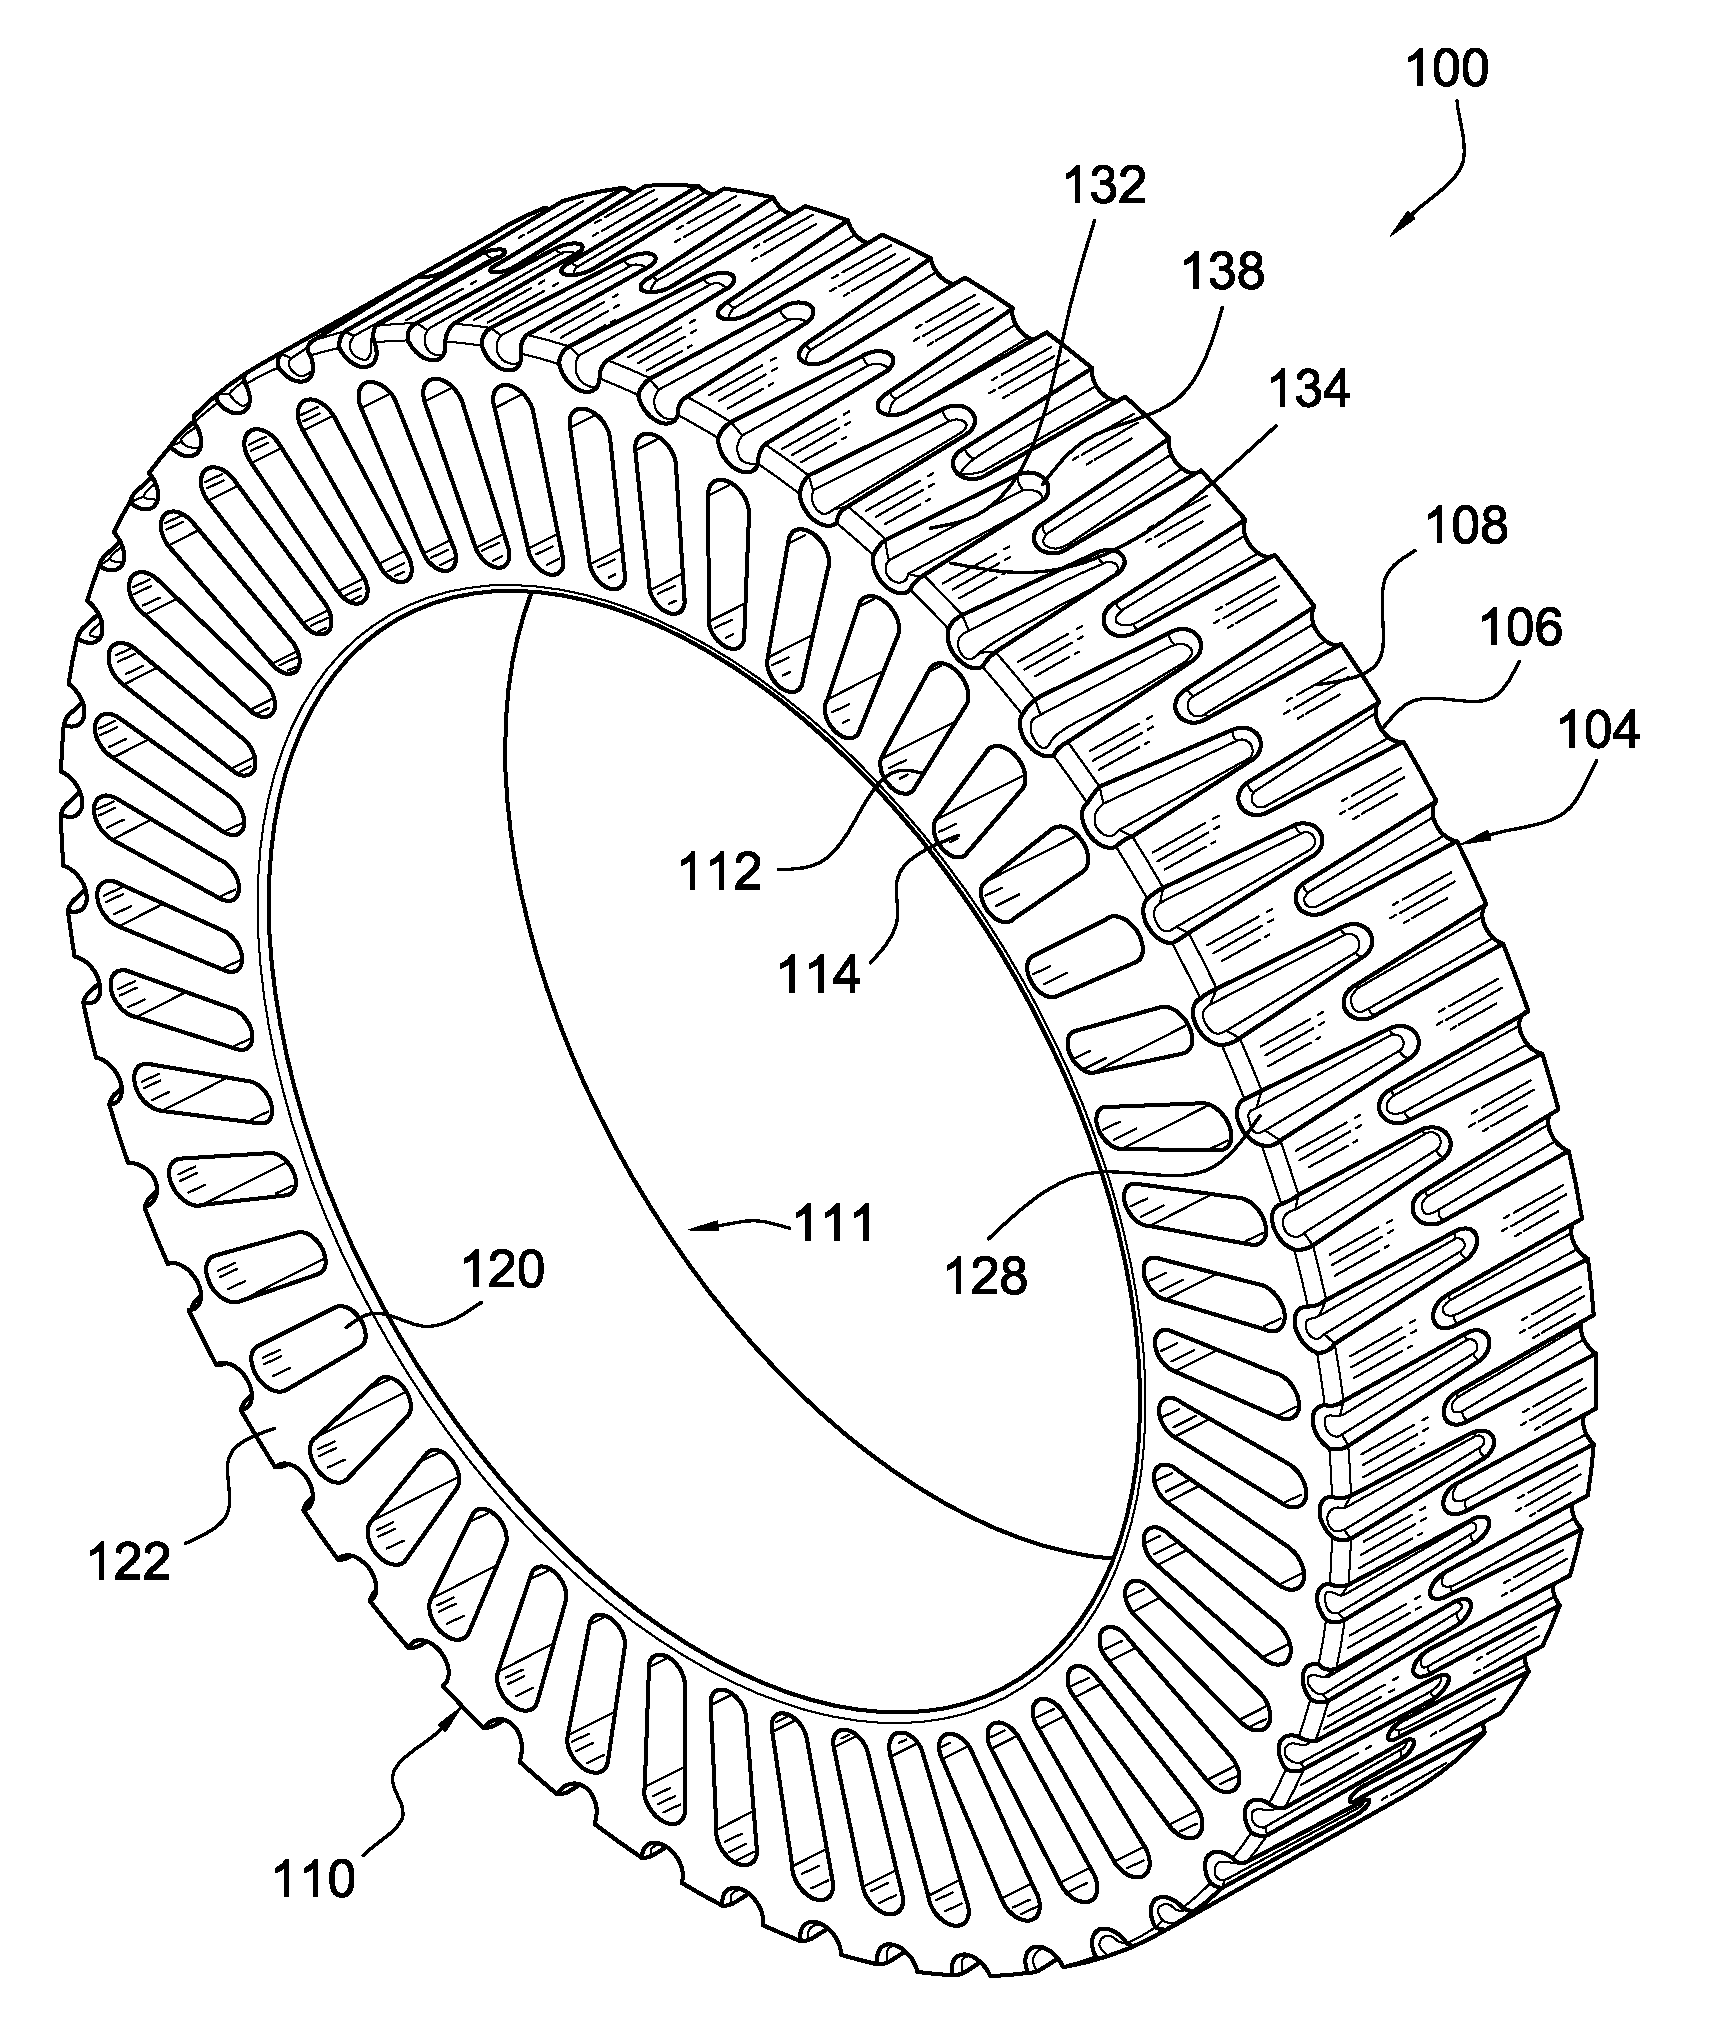 Non-pneumatic tire having angled tread groove wall